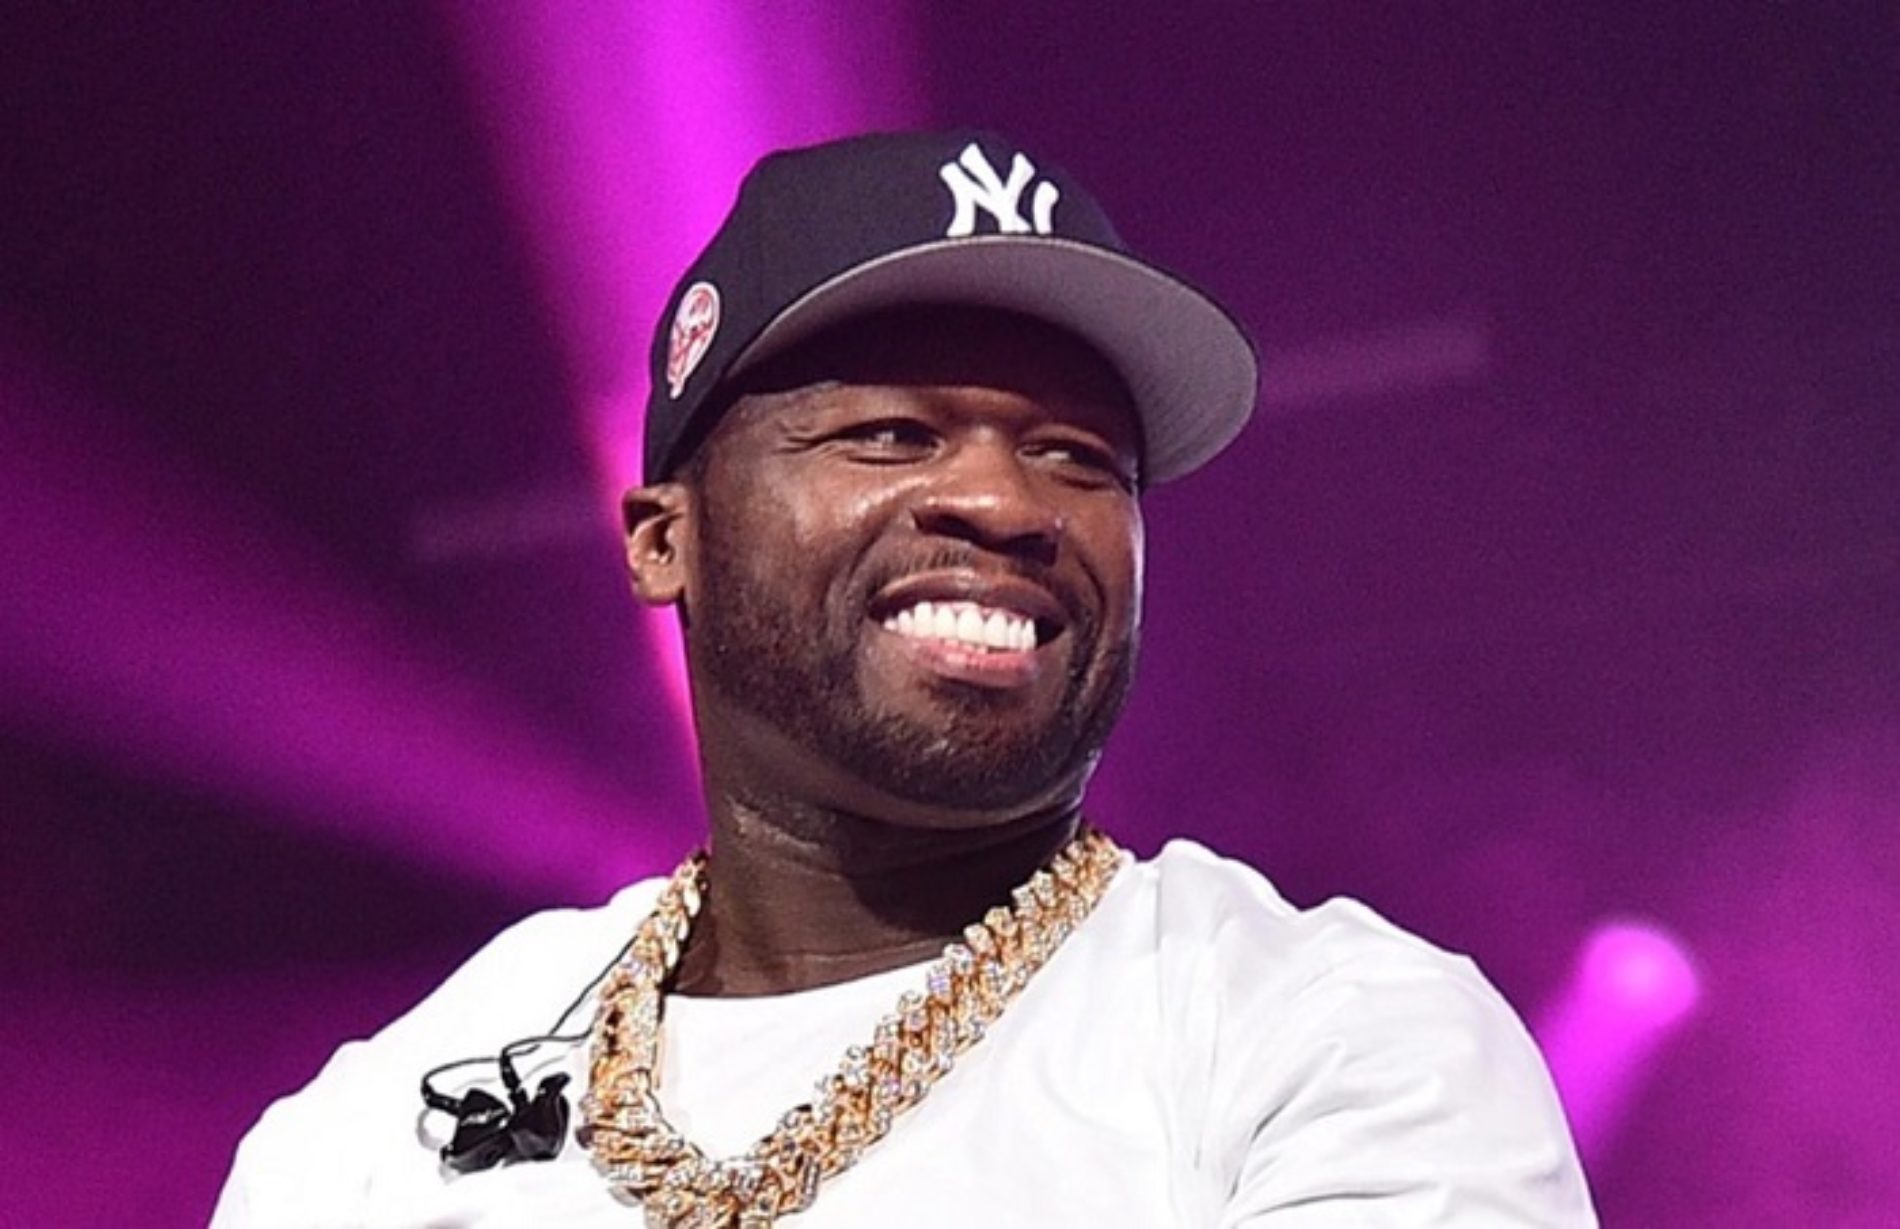 50 Cent continues to show how disgusting he is by trolling LGBTQ people on Instagram